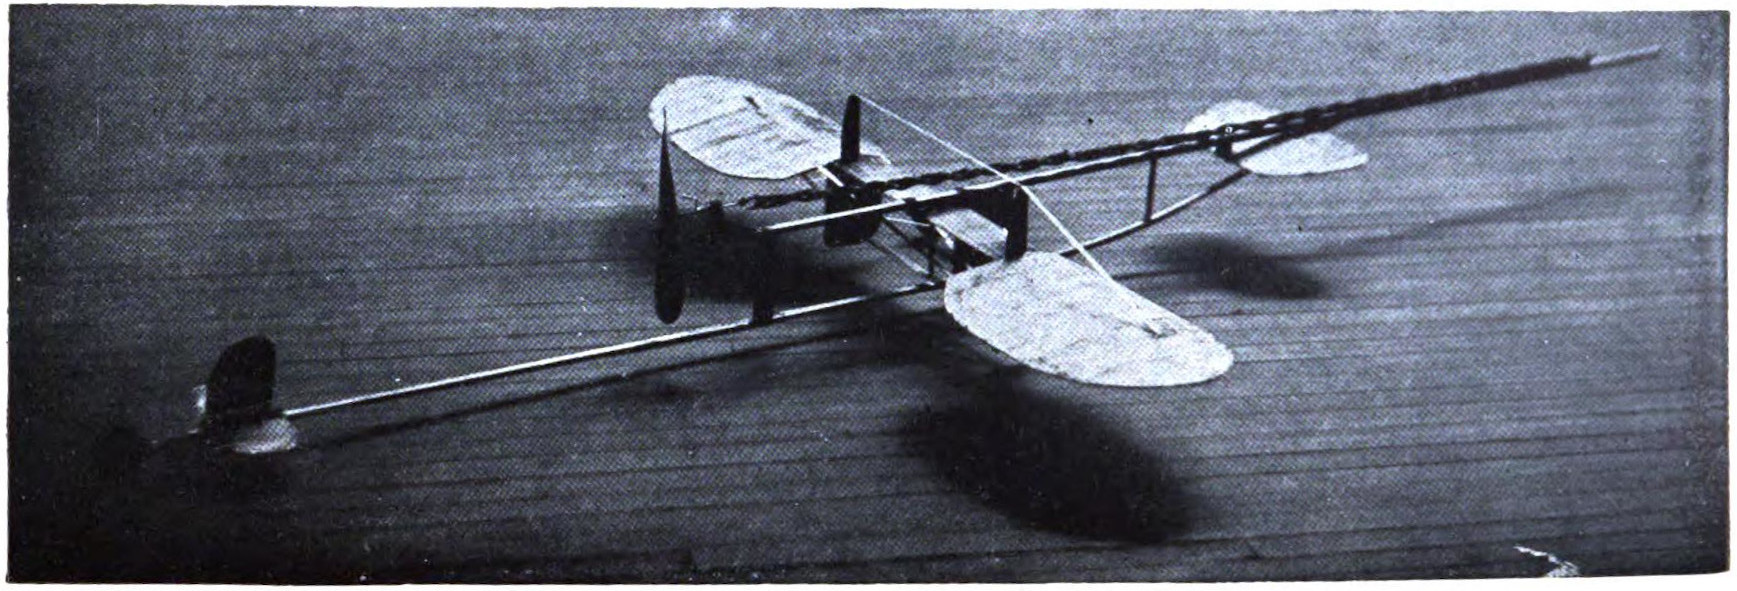 A notable model possessing unusual stability. Built by W.S. Howell, Jr.